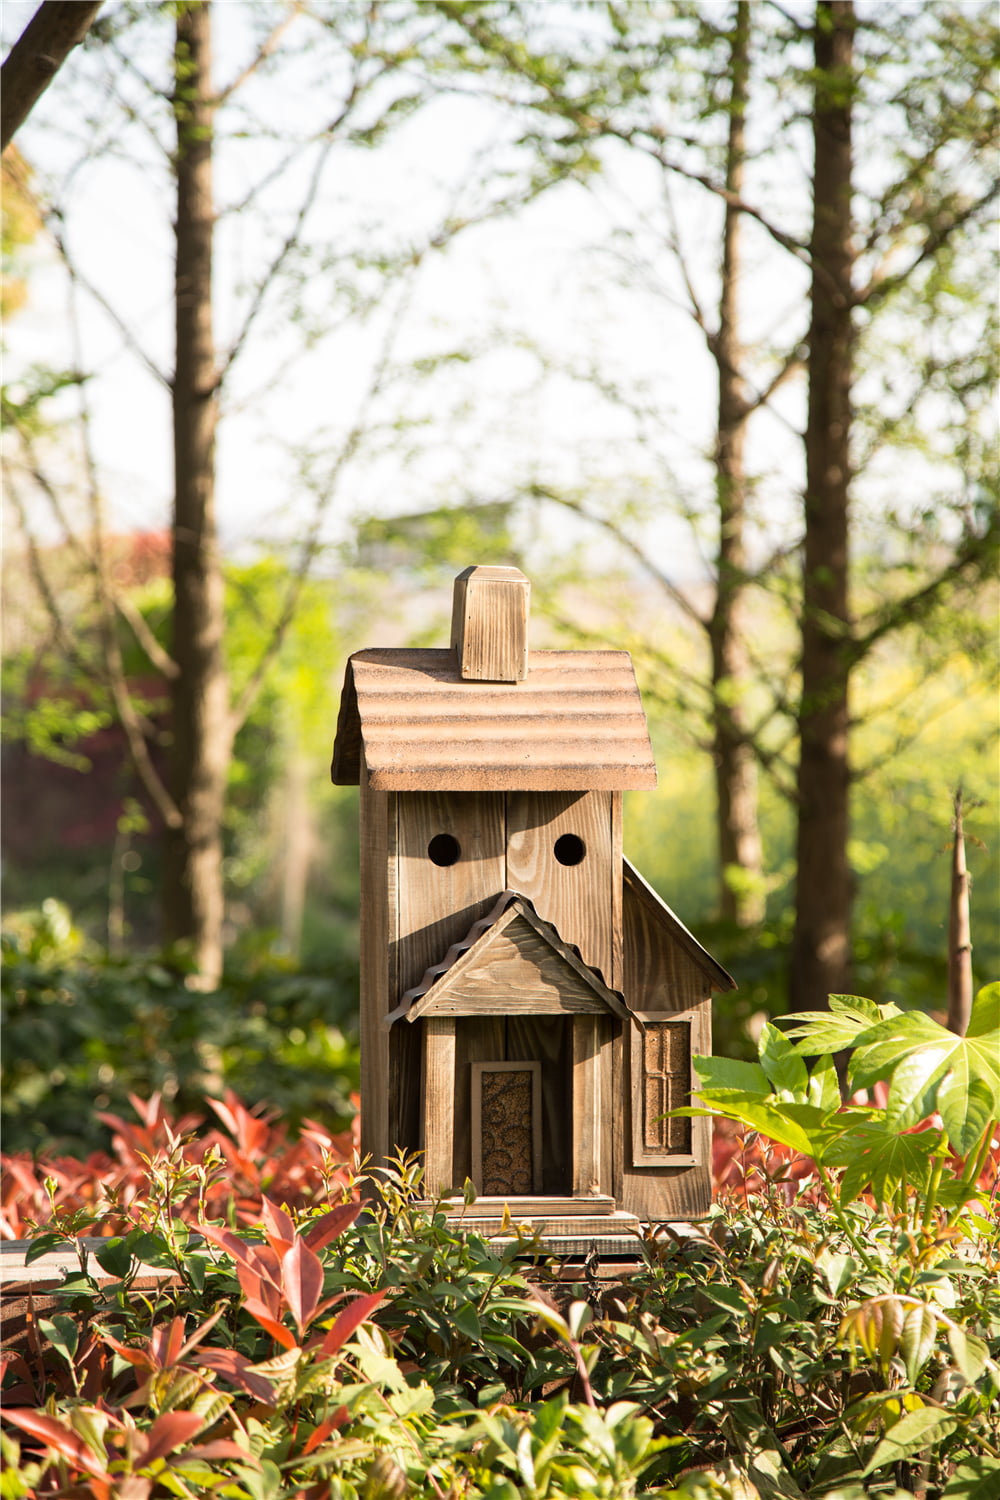 Details about   Glitzhome 10.24'' Wood Hanging 3D Flowers Carved Bird House Nest Box Cage Garden 